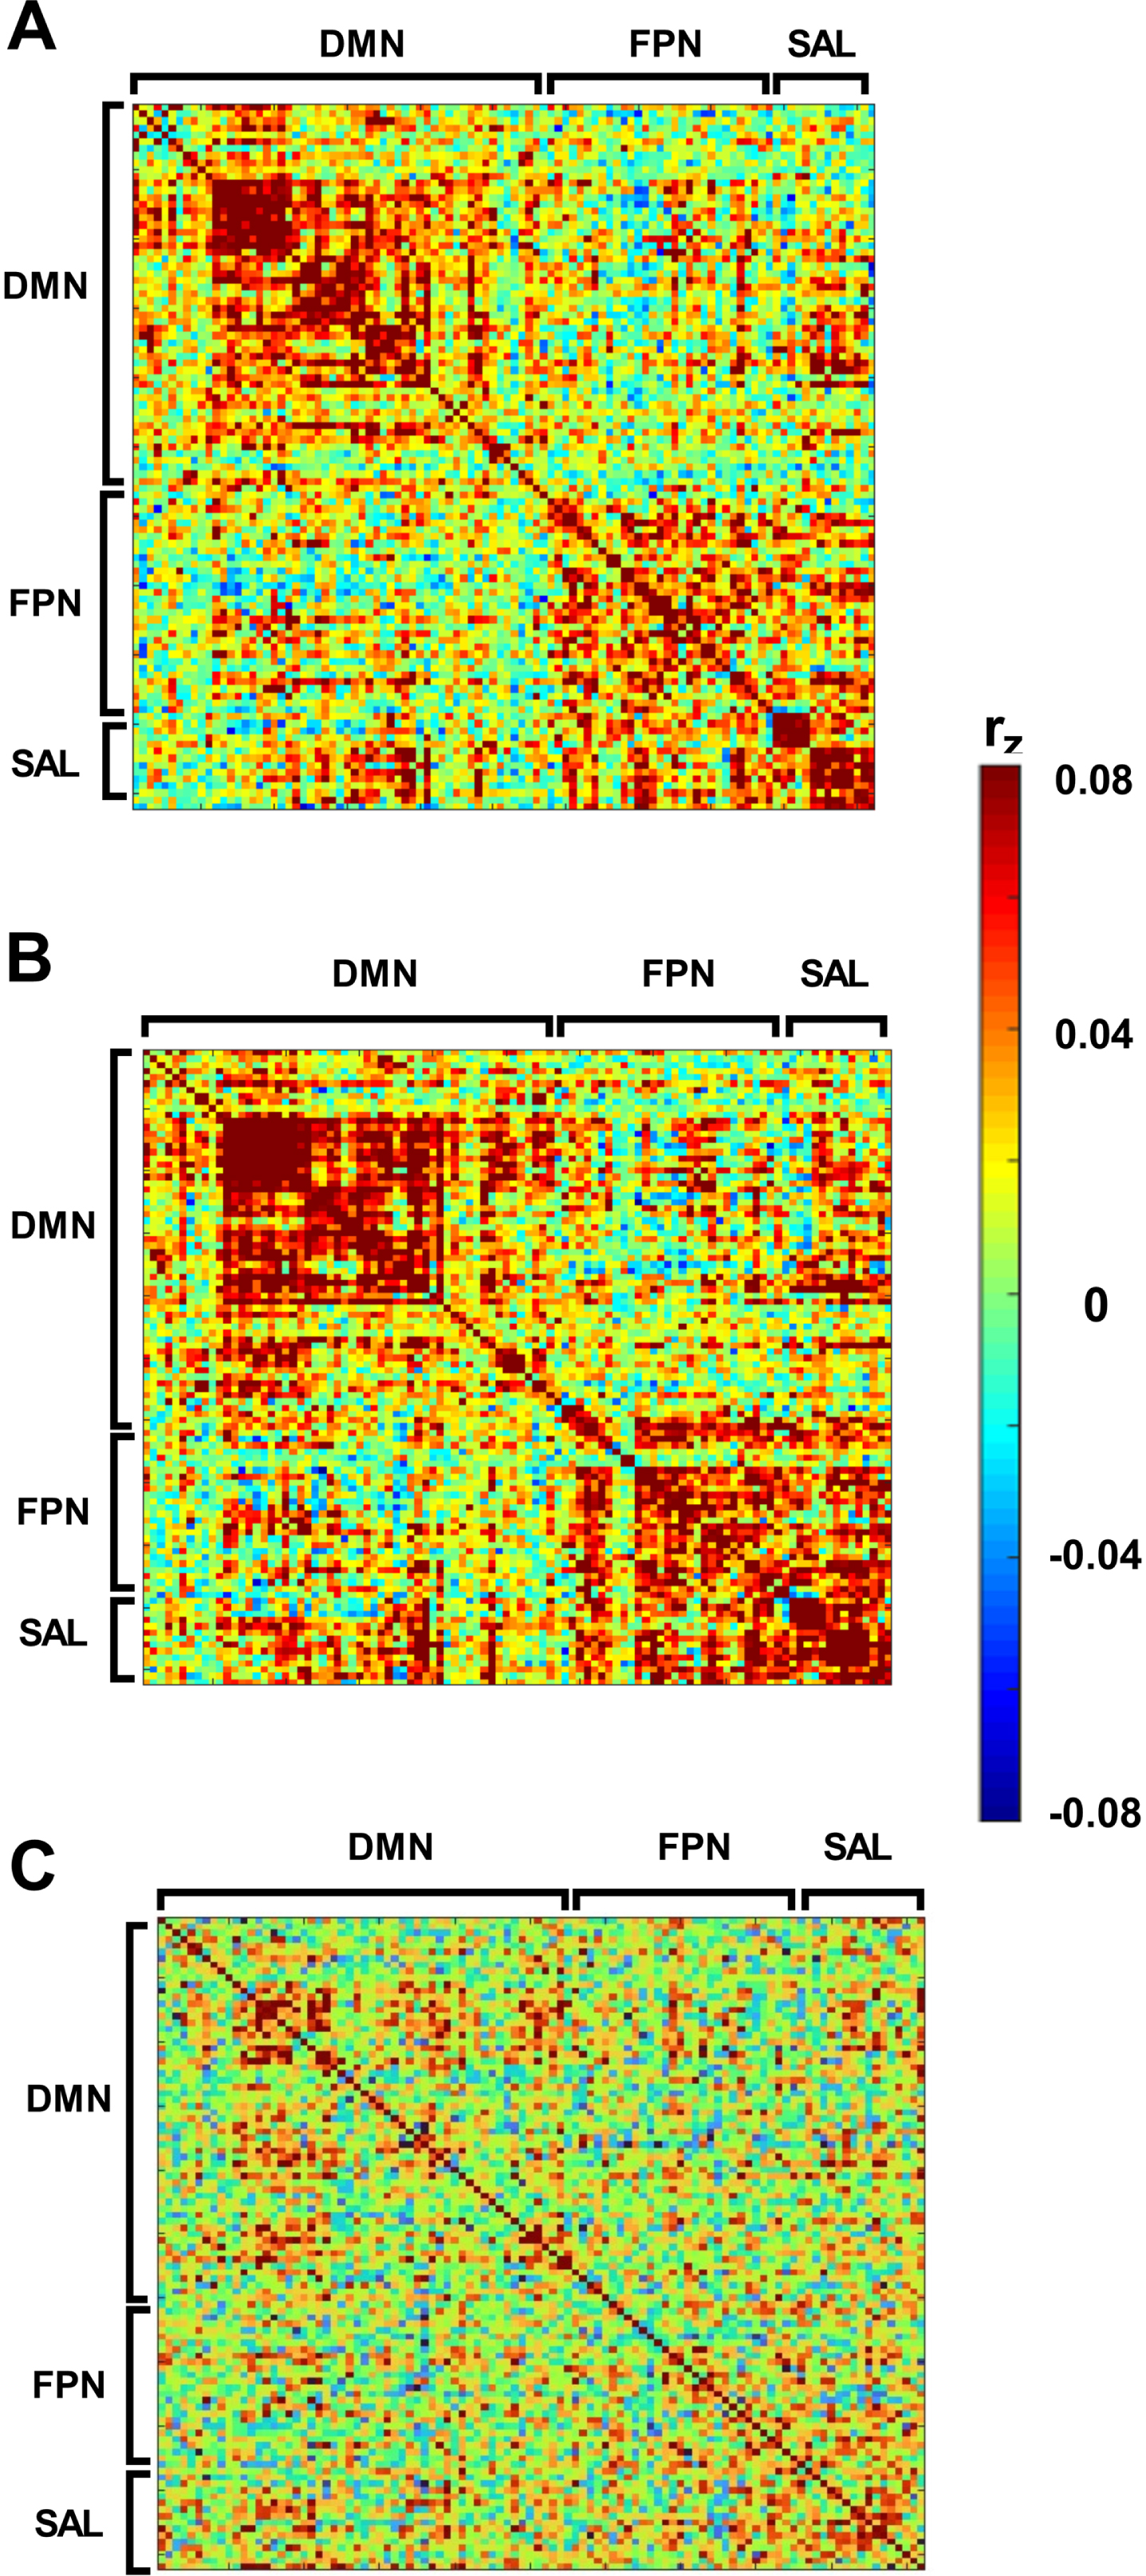 Group-averaged (CN and MCI) adjacency matrix representing functional connectivity of DMN, FPN, and SAL defined using Power (2011) atlas [44]. A) Before exercise training. B) After exercise training. C) After minus Before exercise training.